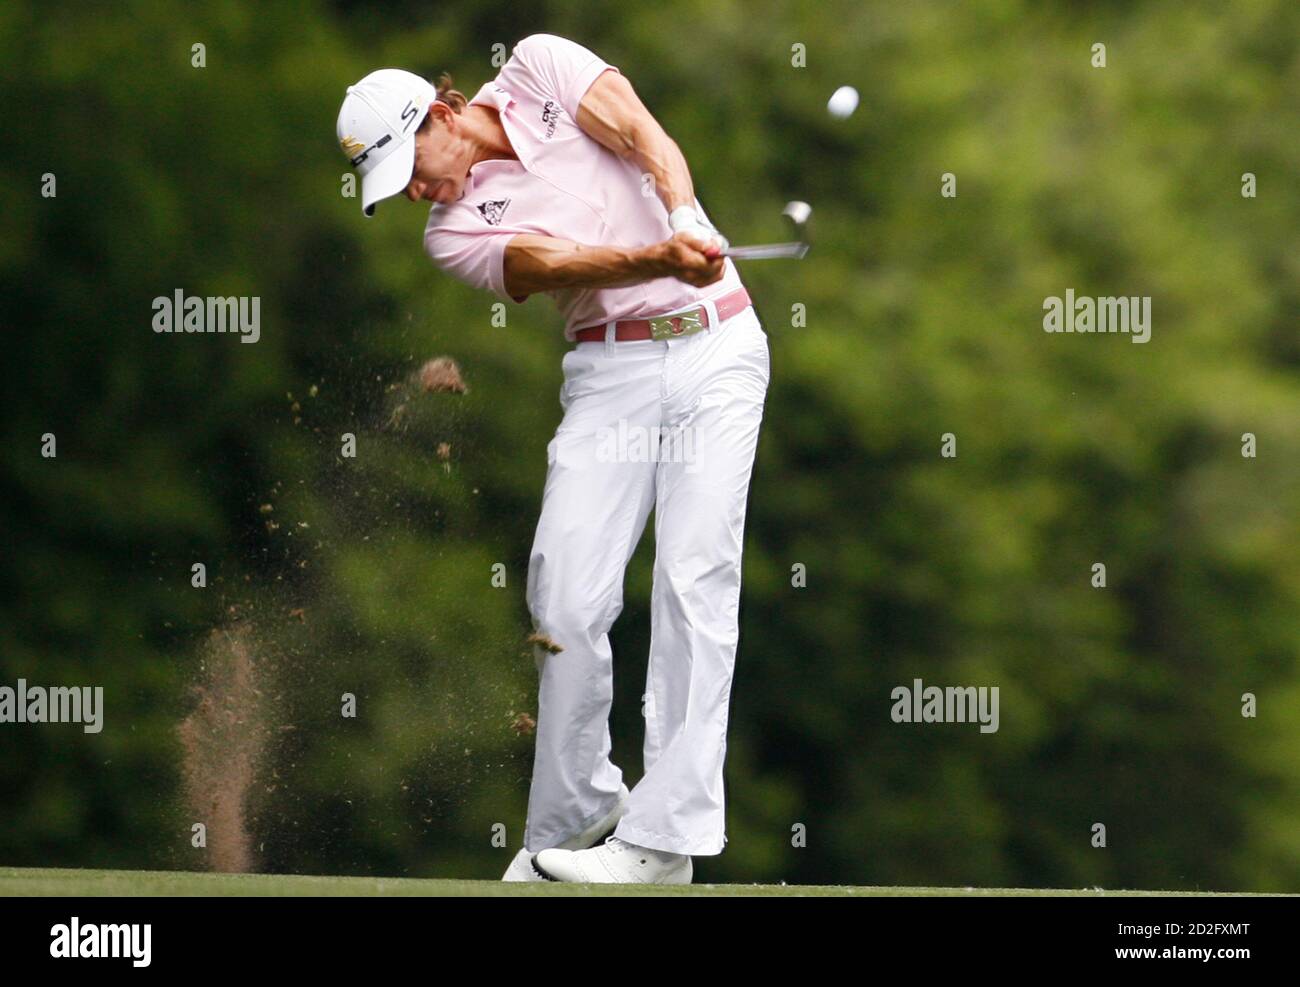 Camillo Villegas of Colombia hits from the fairway at the 11th hole during the third round of the Quail Hollow Championship in Charlotte, North Carolina May 1, 2010. REUTERS/Jason Miczek (UNITED STATES - Tags: SPORT GOLF) Stock Photo